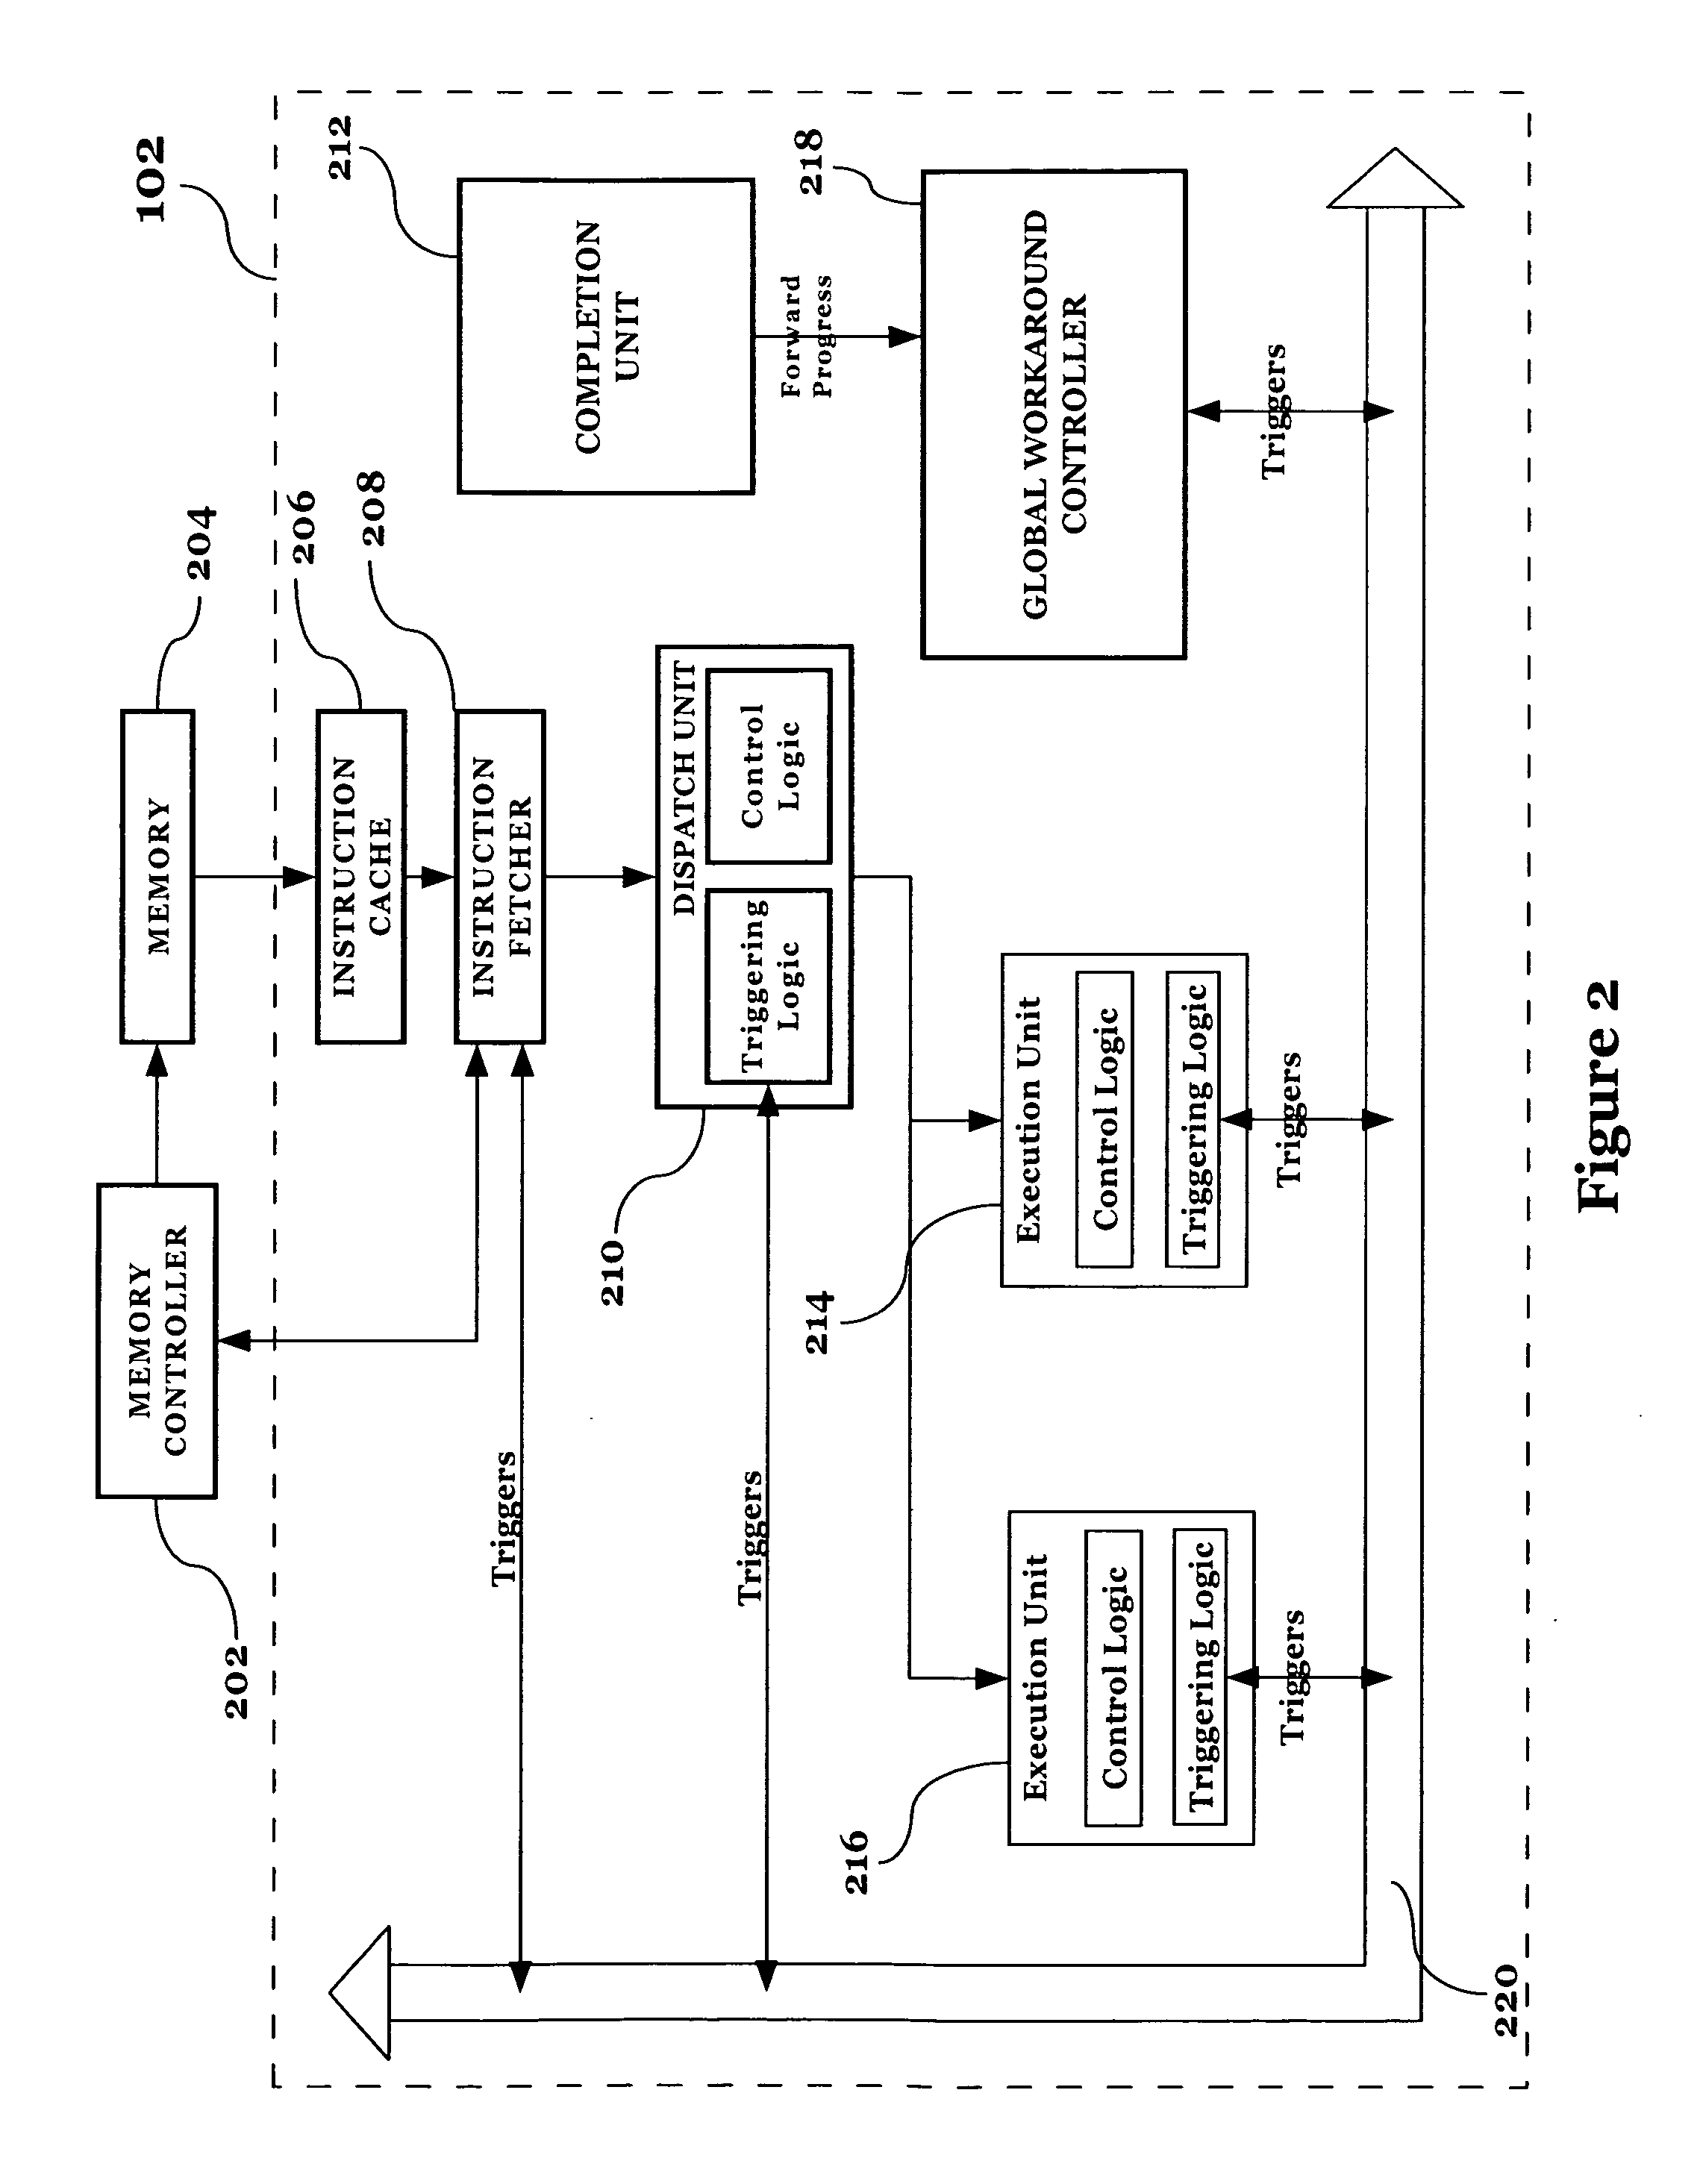 Method of implementing precise, localized hardware-error workarounds under centralized control